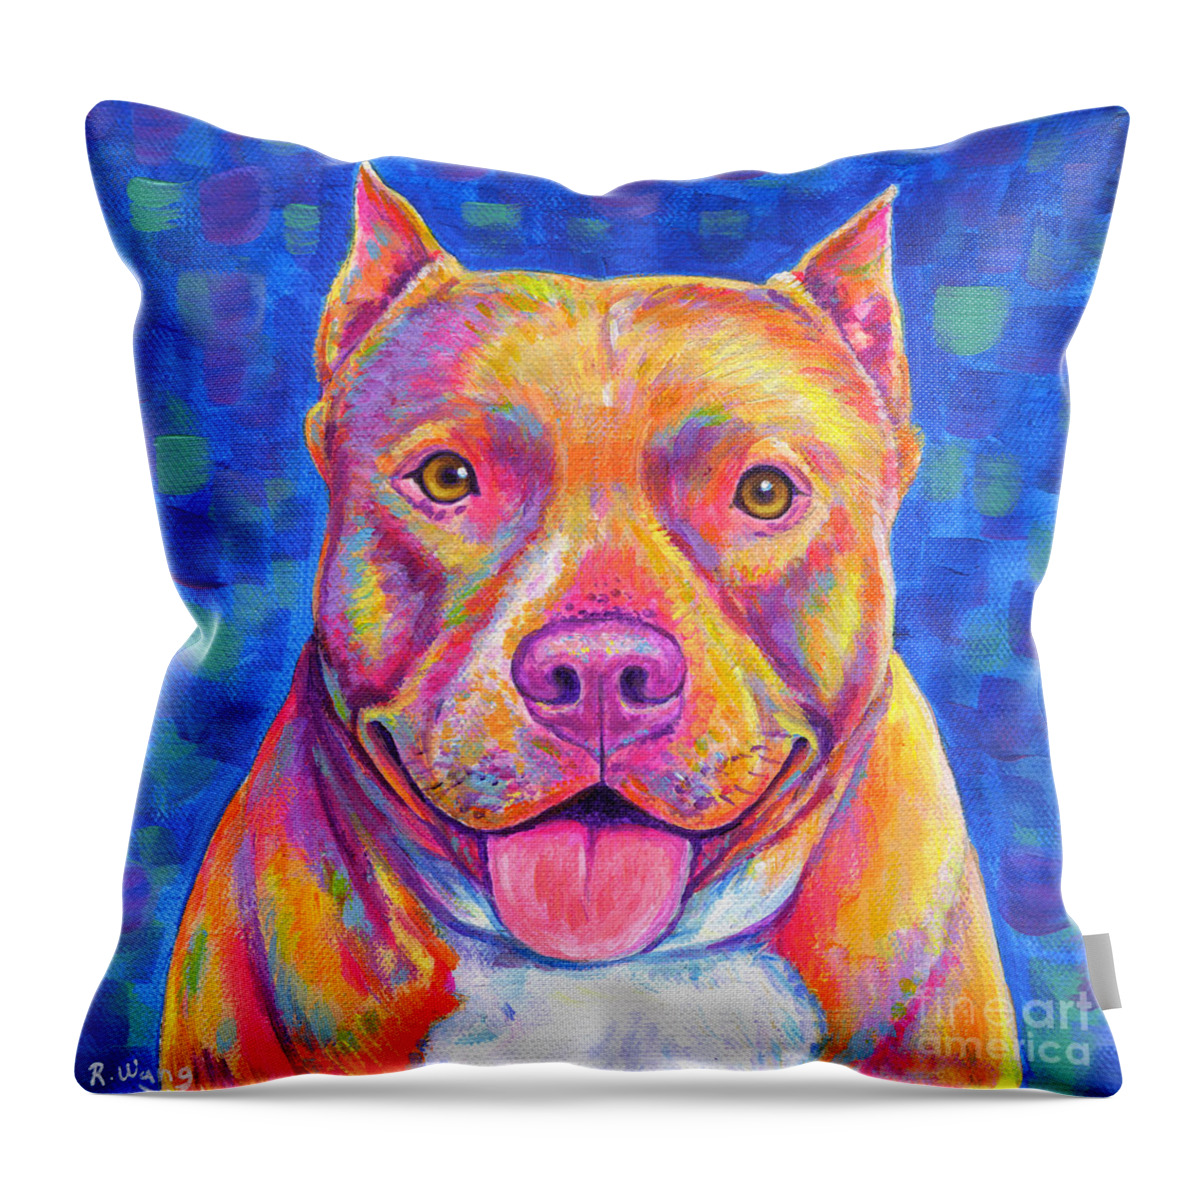 Pitbull Throw Pillow featuring the painting Colorful Pitbull Dog by Rebecca Wang